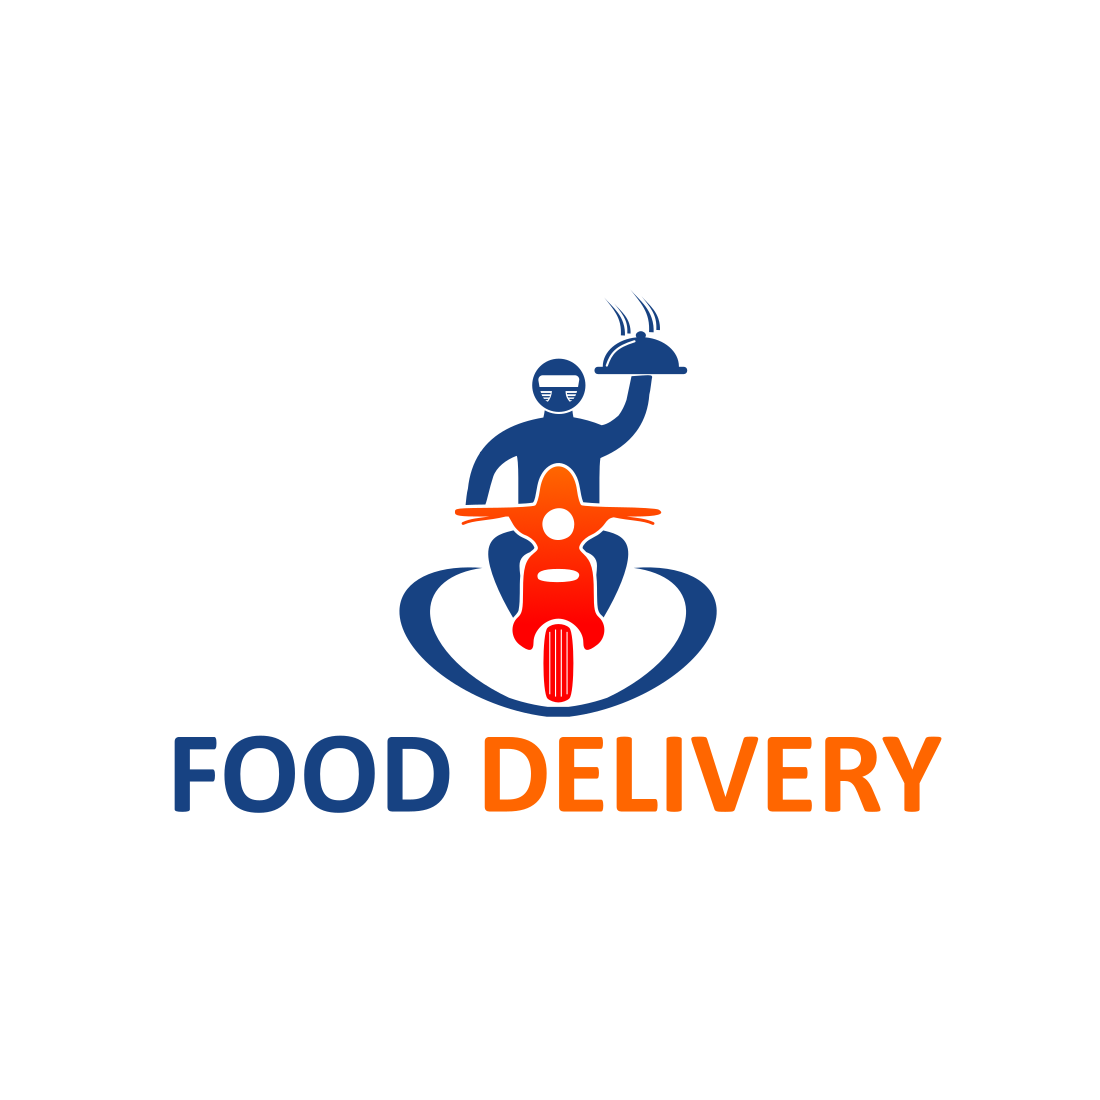 Food Delivery Custom Design Logo Template previews.